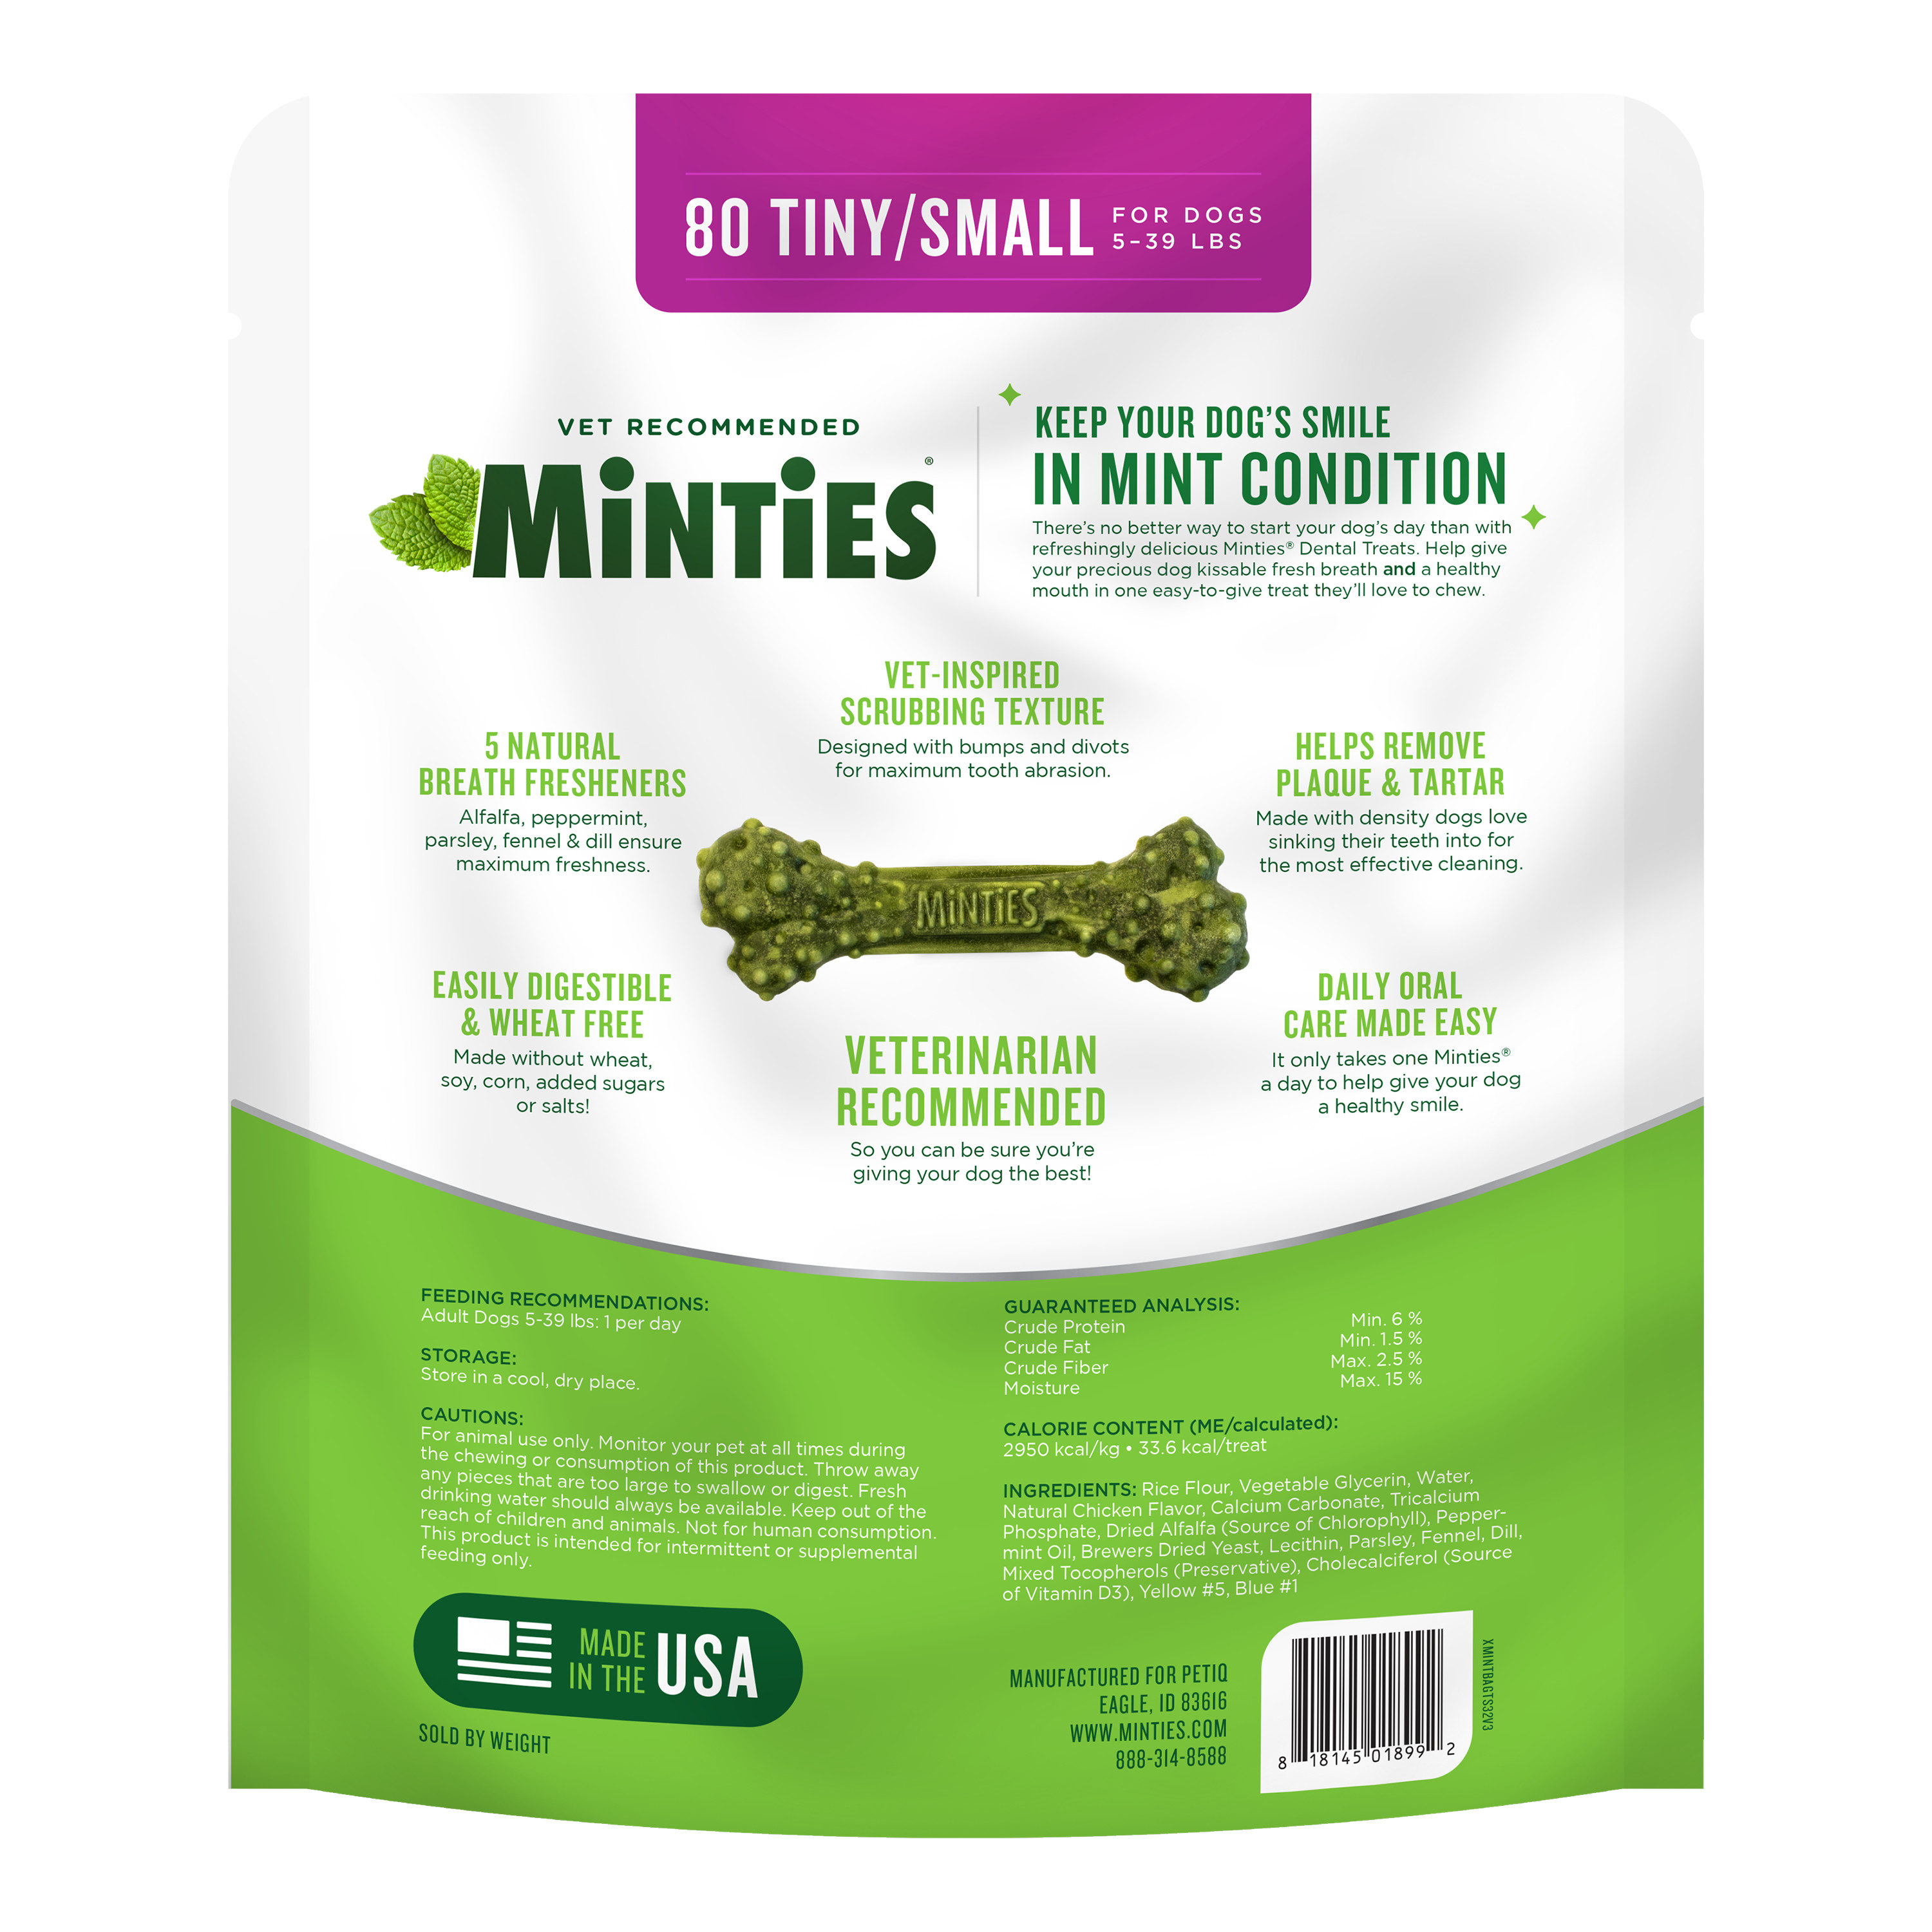 Minties Dental Bone Treats, Chews for Tiny/Small Dogs under 40 lbs, 80 Count, 32 oz, Shelf-Stable - image 3 of 9